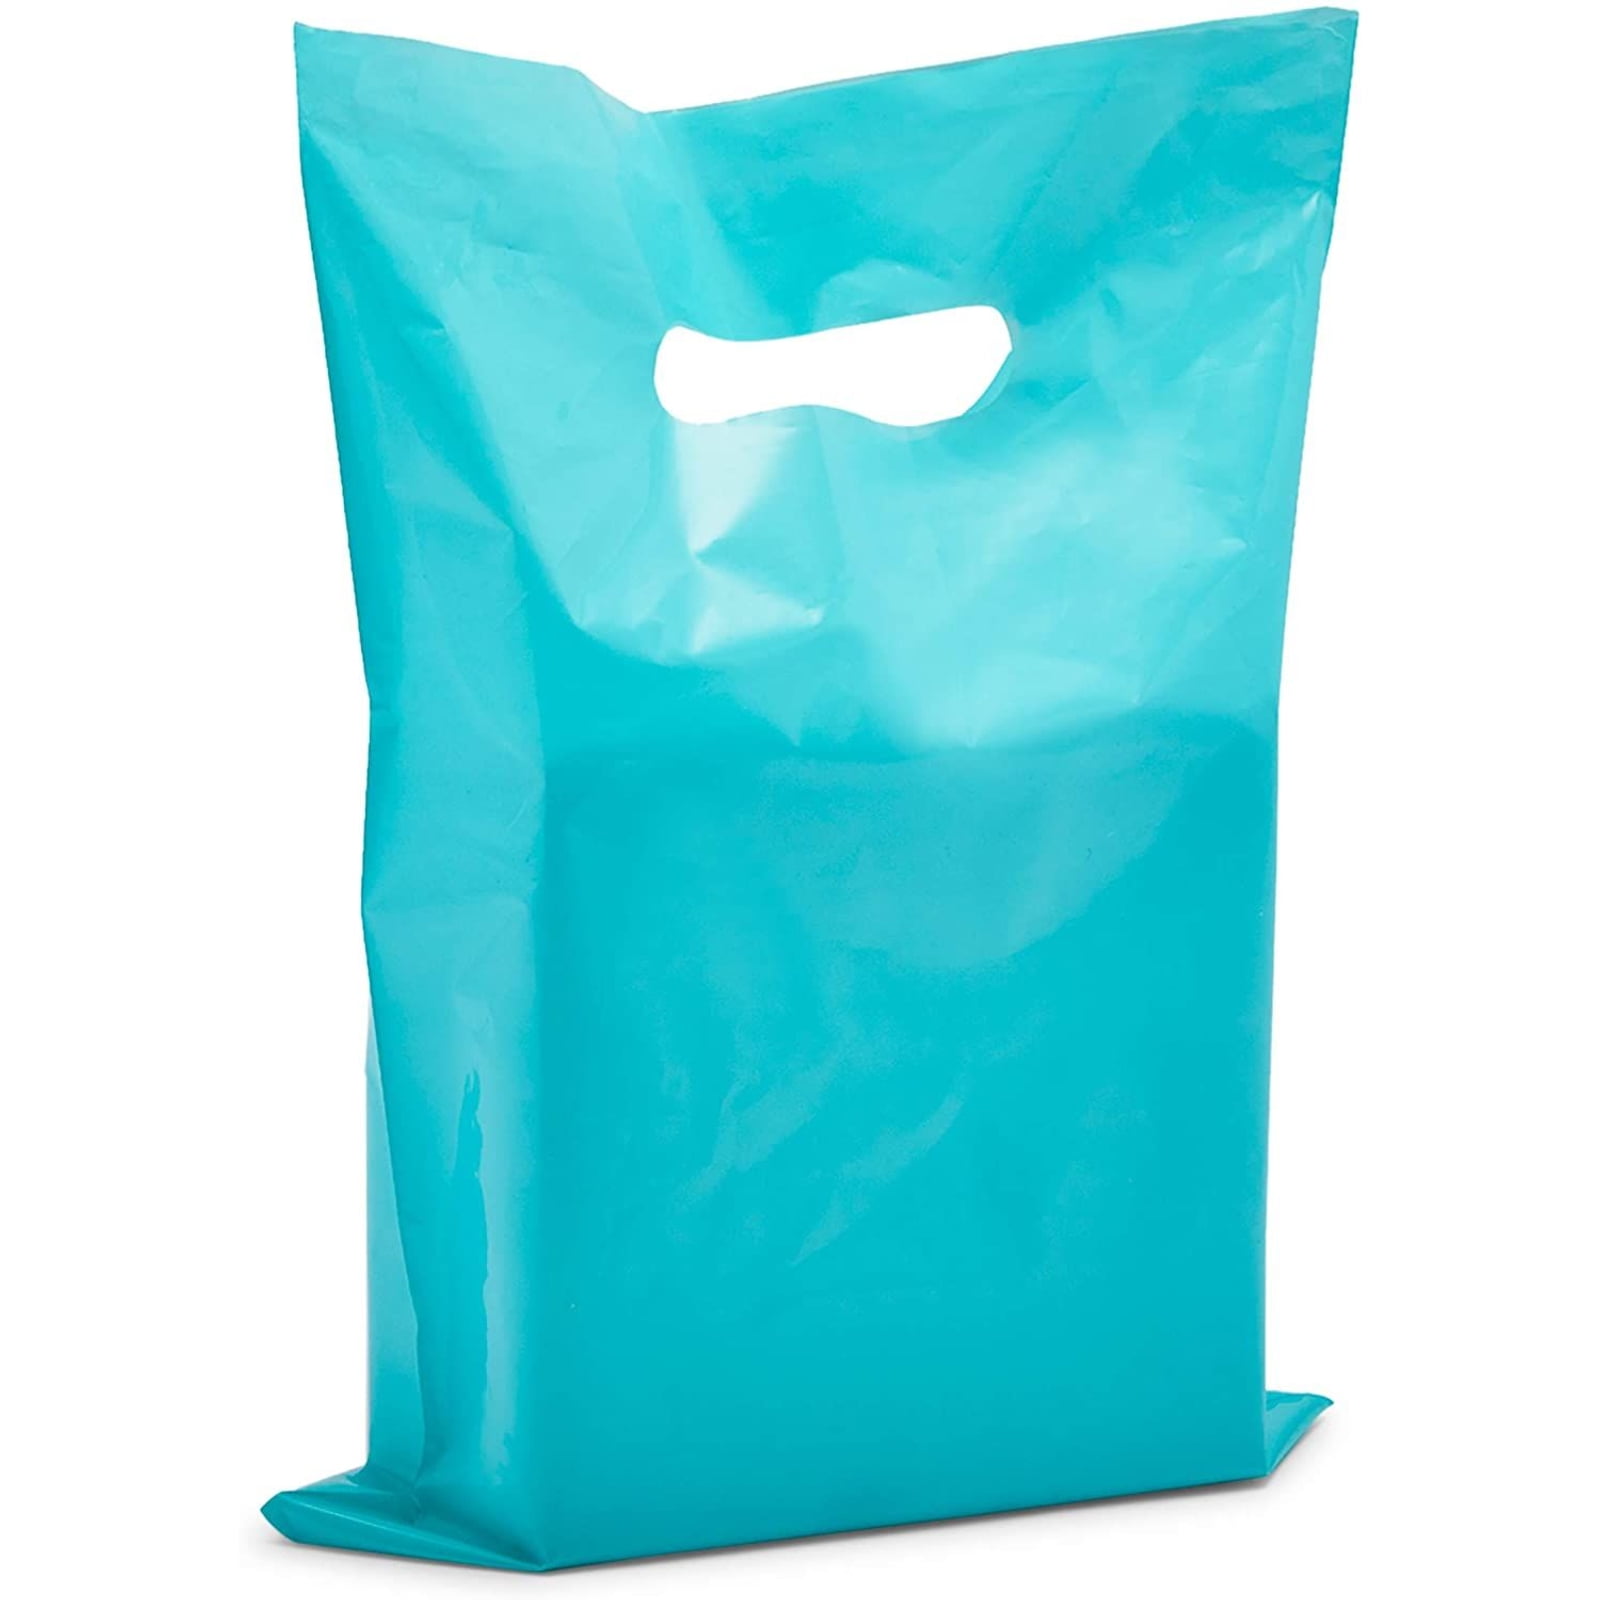 Low Density Retail Clothes Shopping Bag Teal Glossy with Die-Cut Handles 9 x 12 Boutiques and Souvenirs 100 Pack 9 x 12 MWS 1.25 Mil LDPE for Stores Plastic Merchandise Bags 